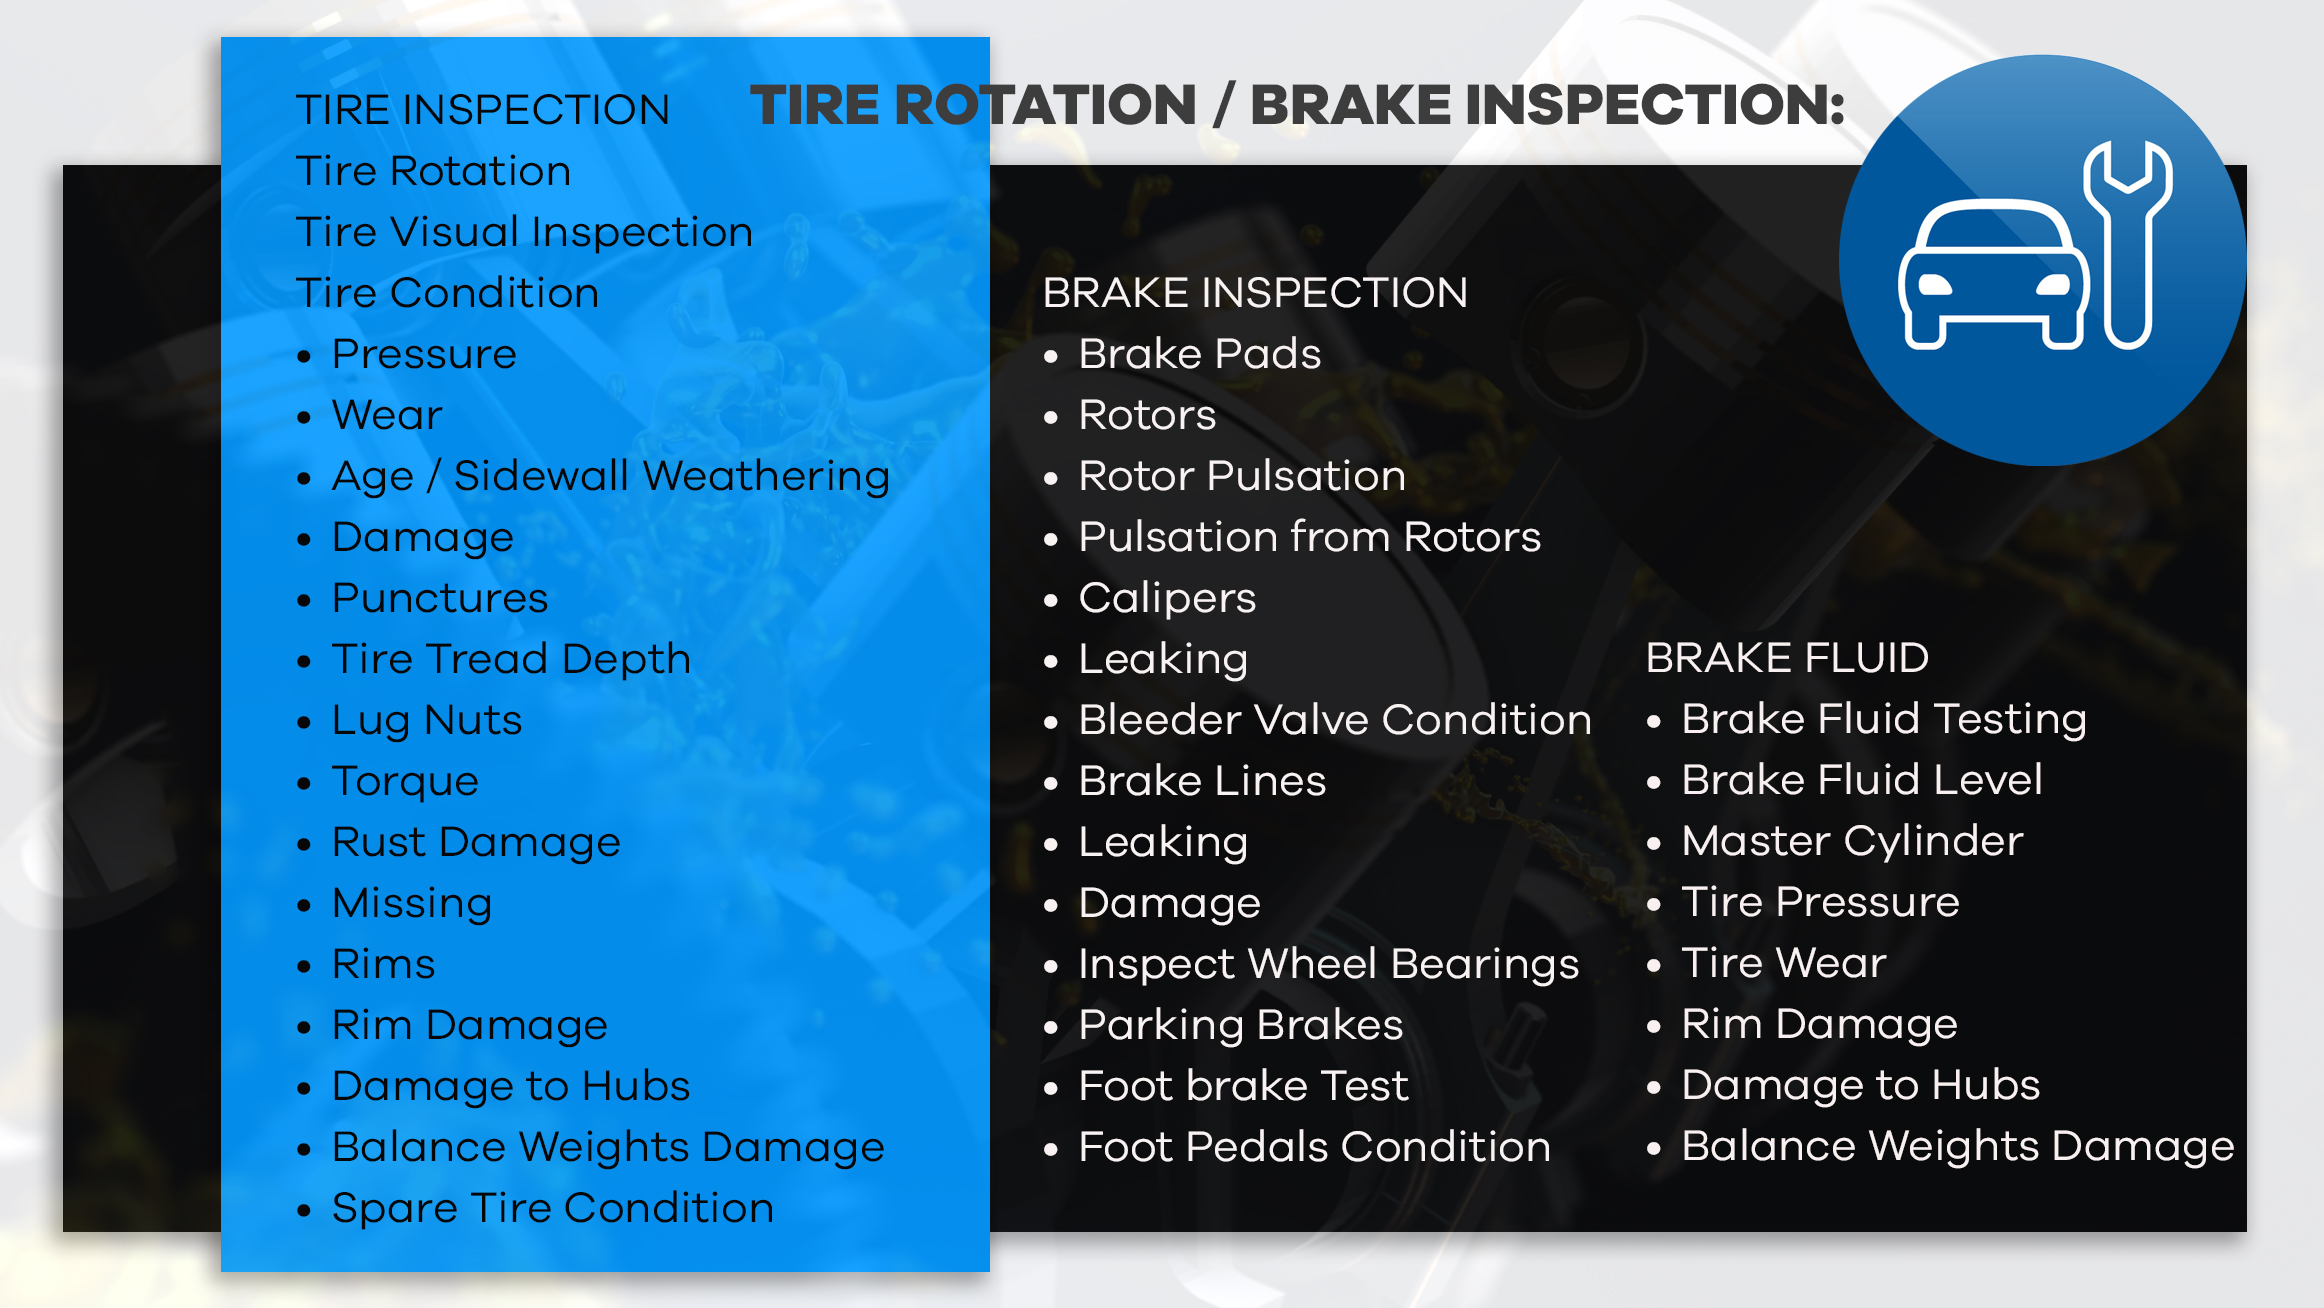 Brakes and tire rotation